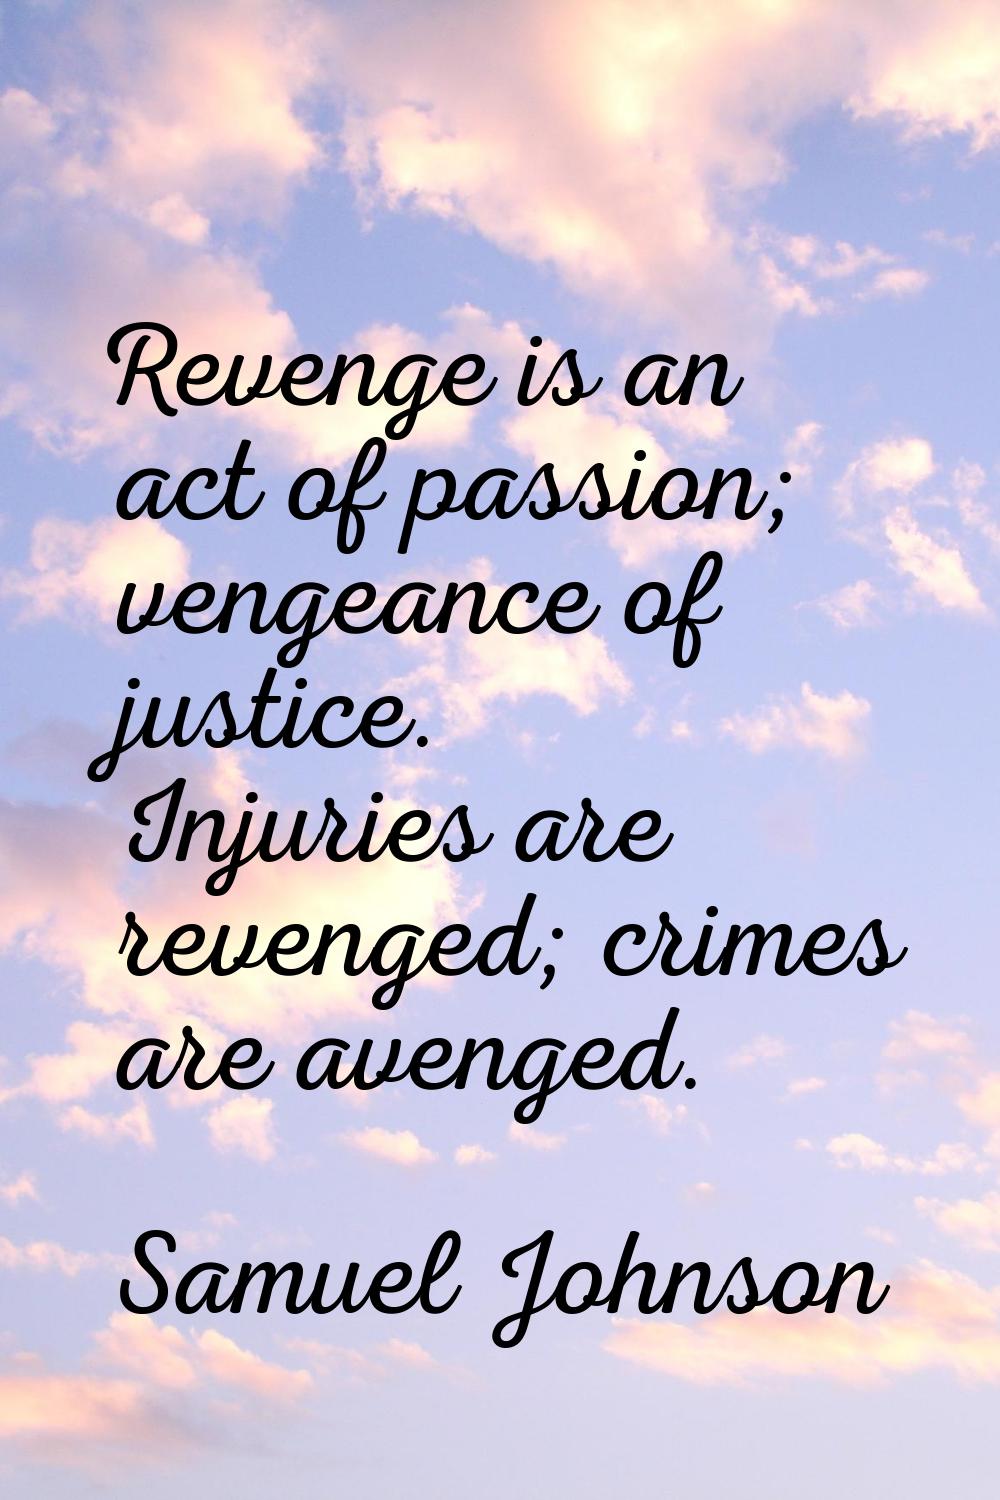 Revenge is an act of passion; vengeance of justice. Injuries are revenged; crimes are avenged.